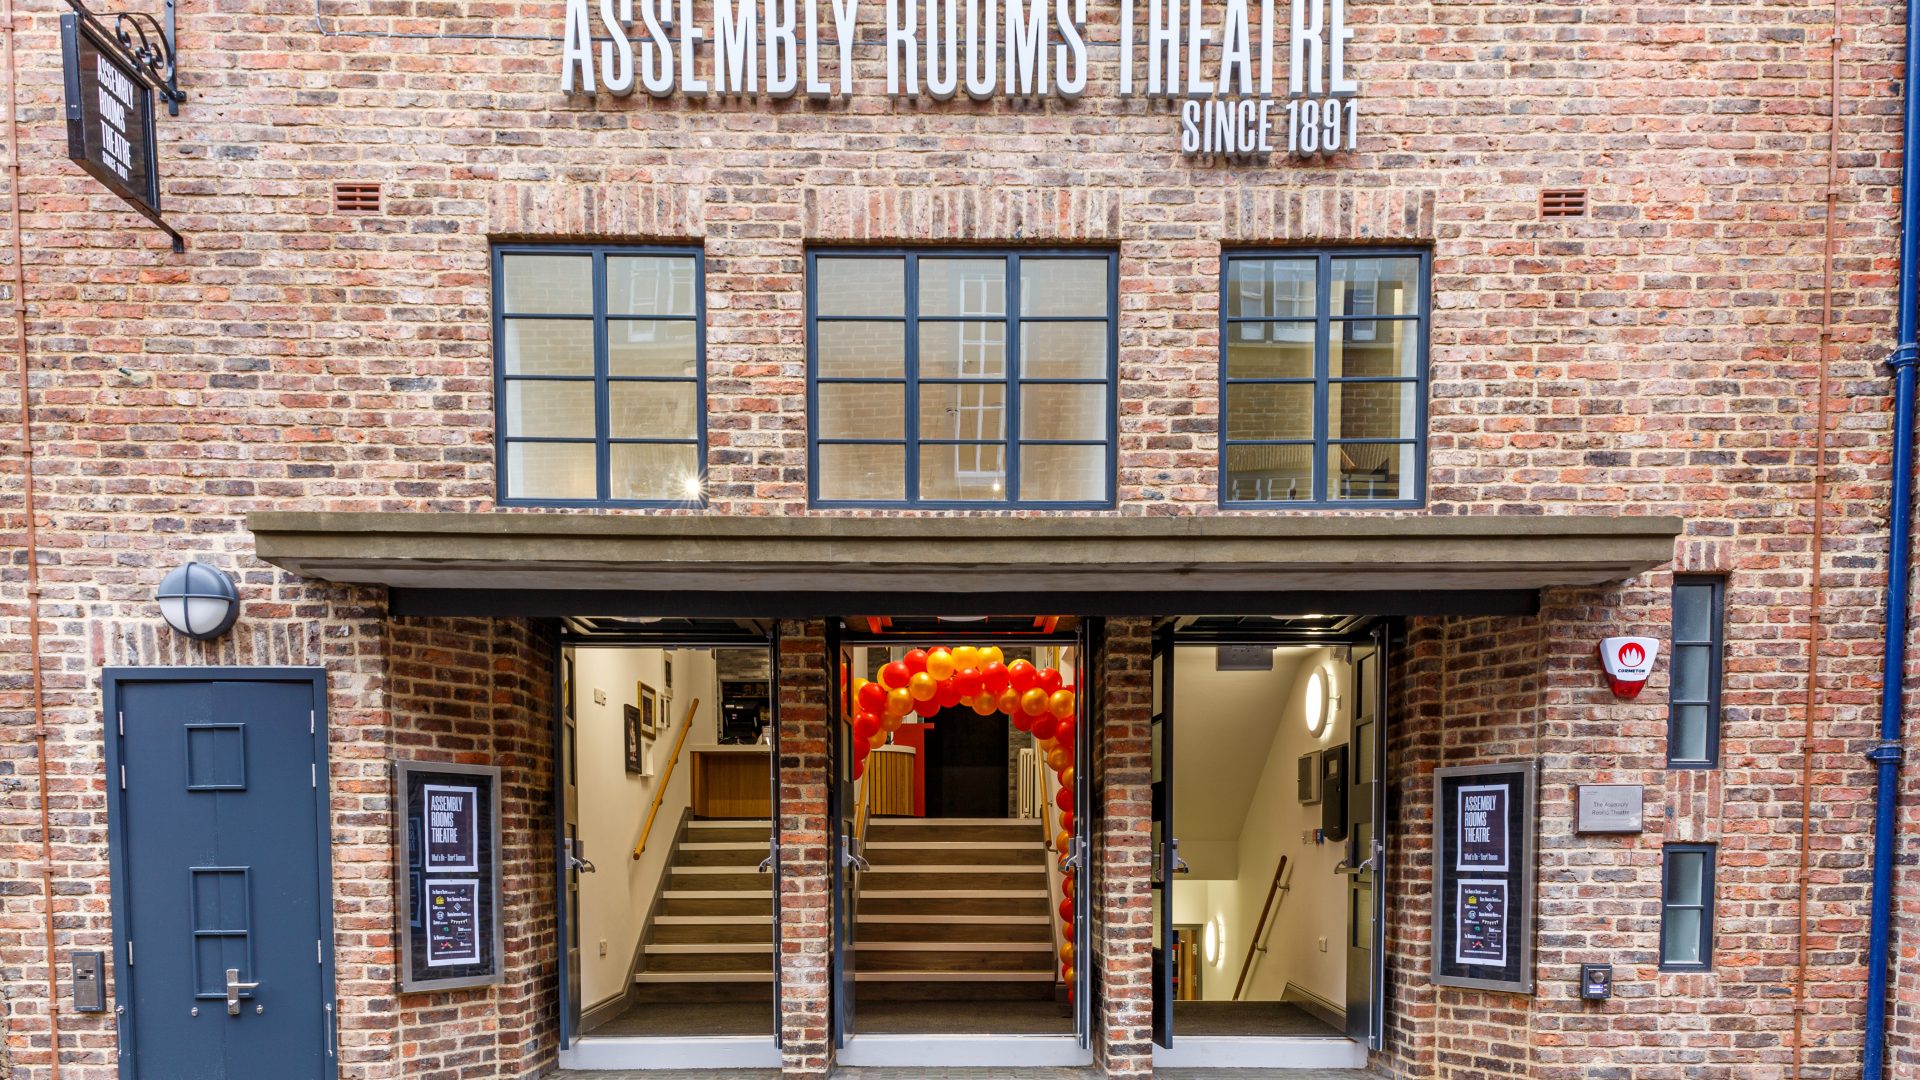 The Assembly Rooms Theatre